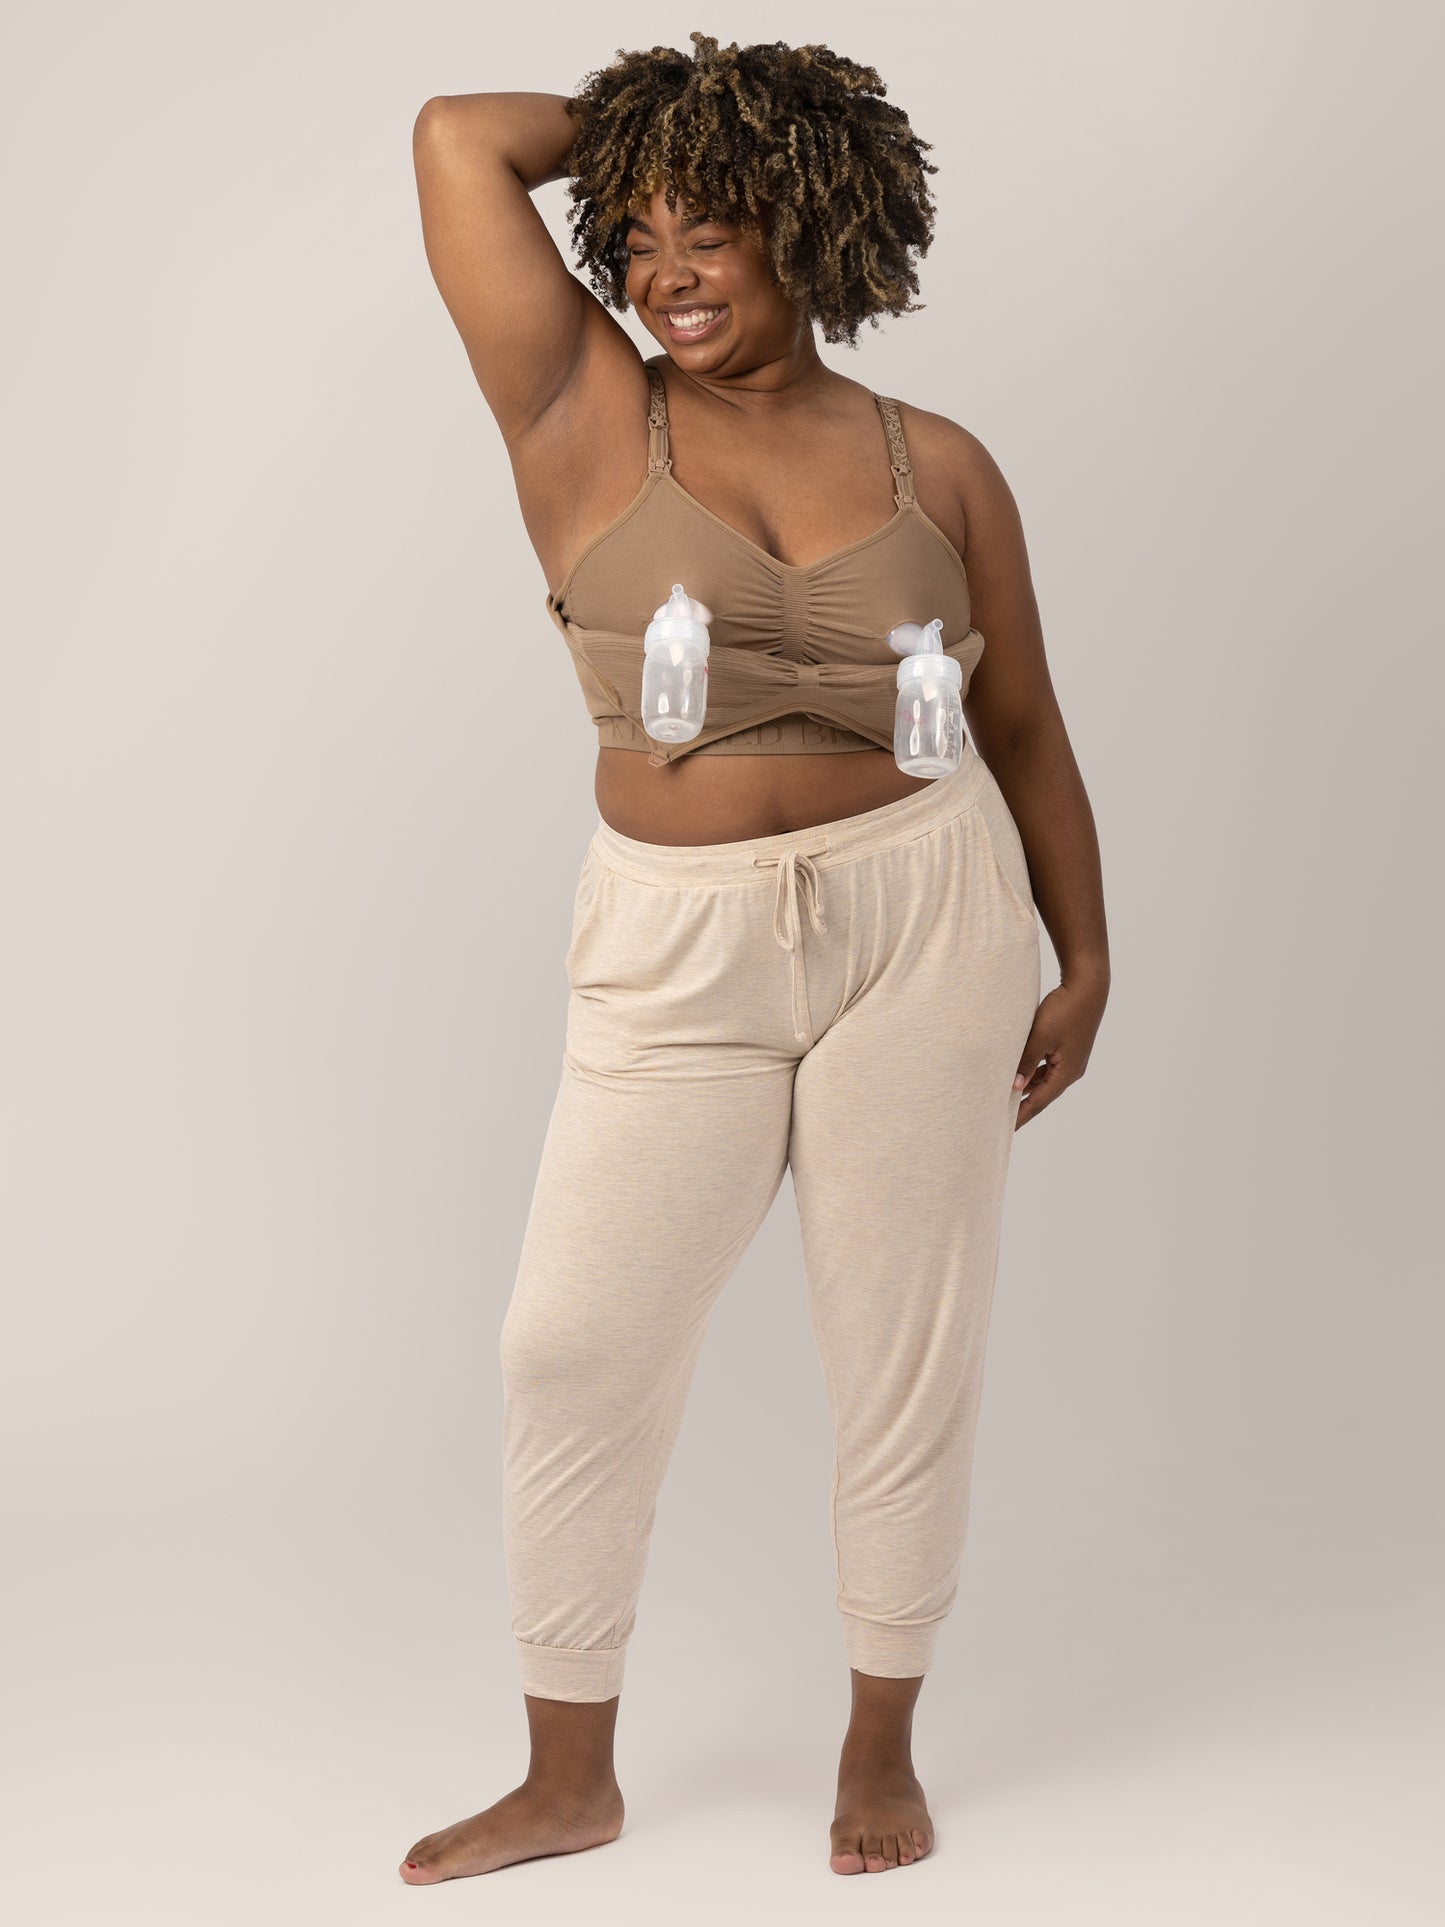 Model with one hand behind her head, wearing the Sublime® Hands-Free Pumping & Nursing Bra in Latte hooked up to two bottles